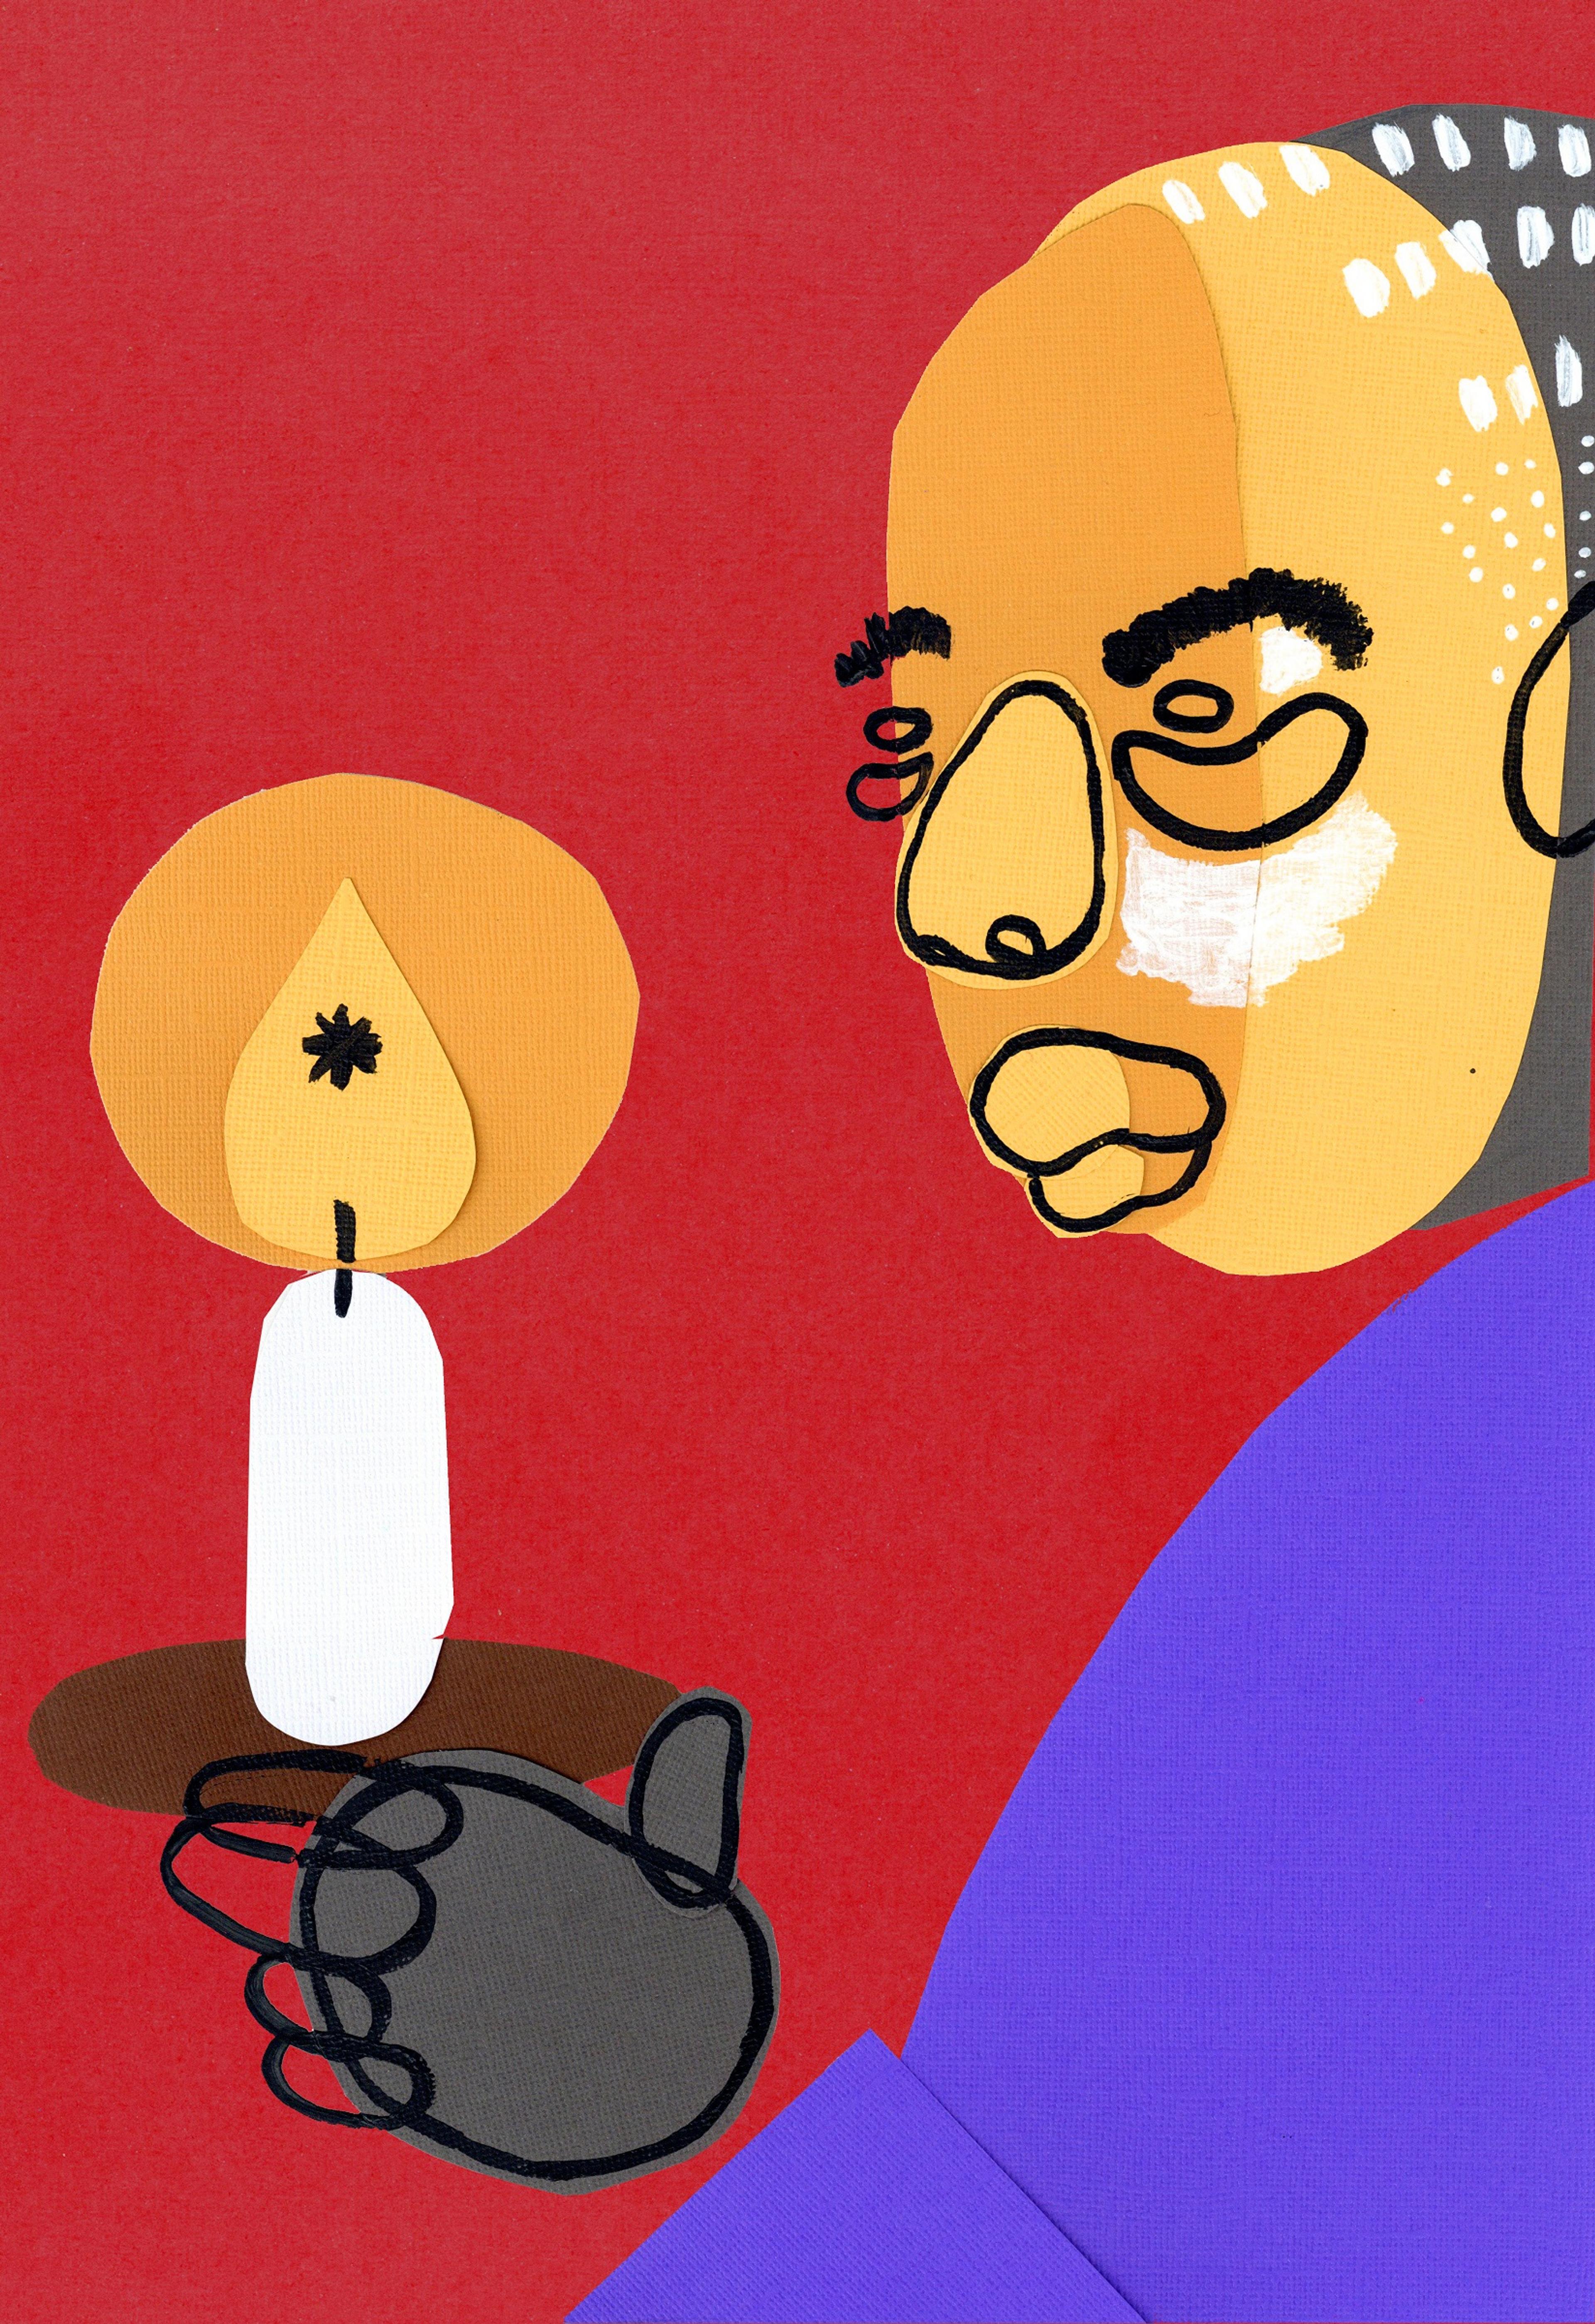 Illustration of a person holding a candle on a red background